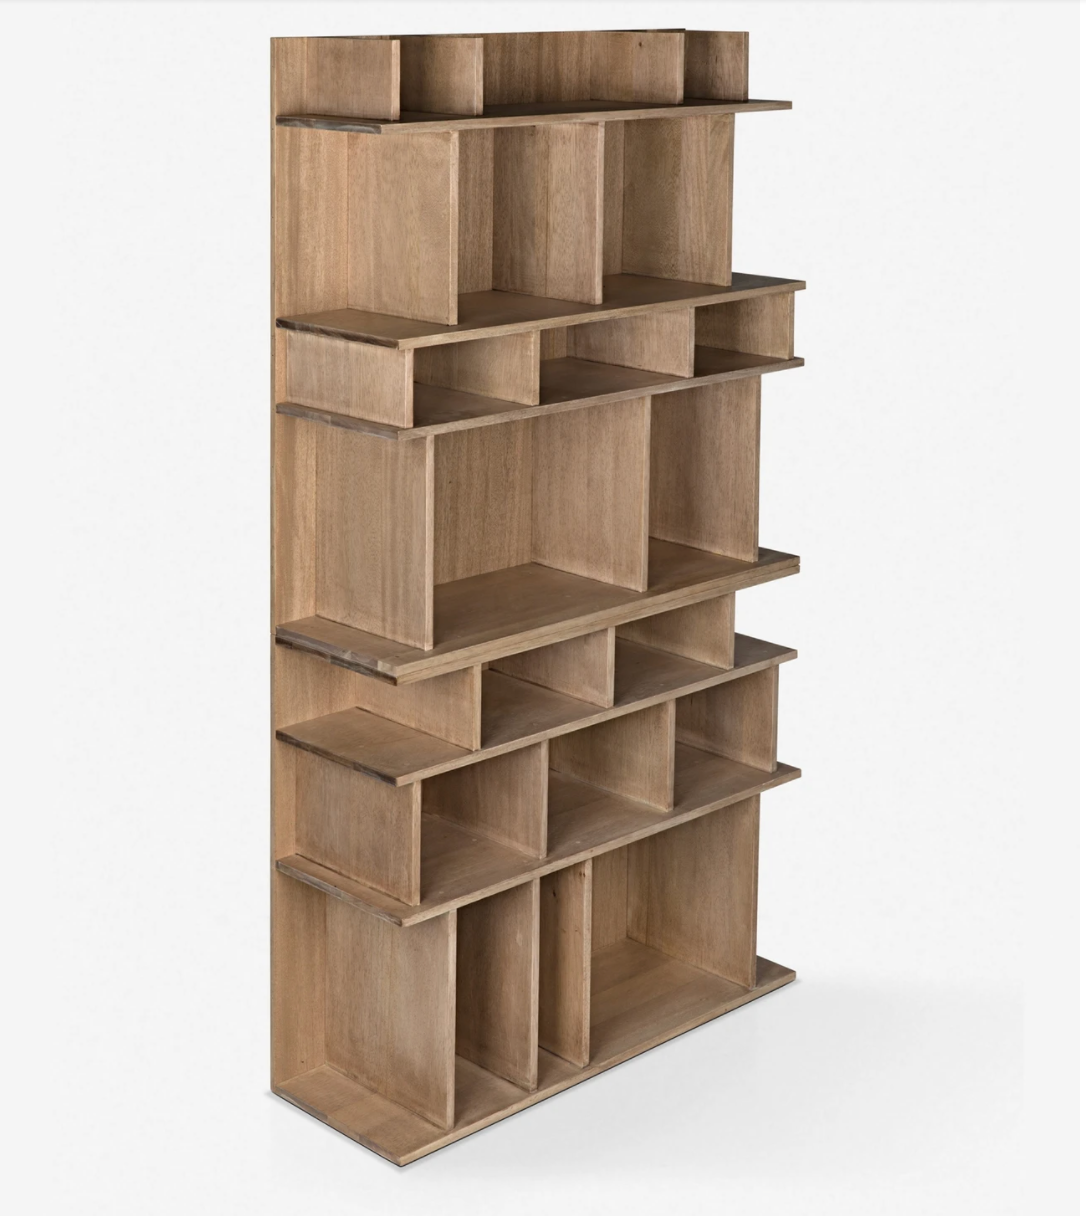 Bookcase from Lulu and Georgia with multi-shaped shelving